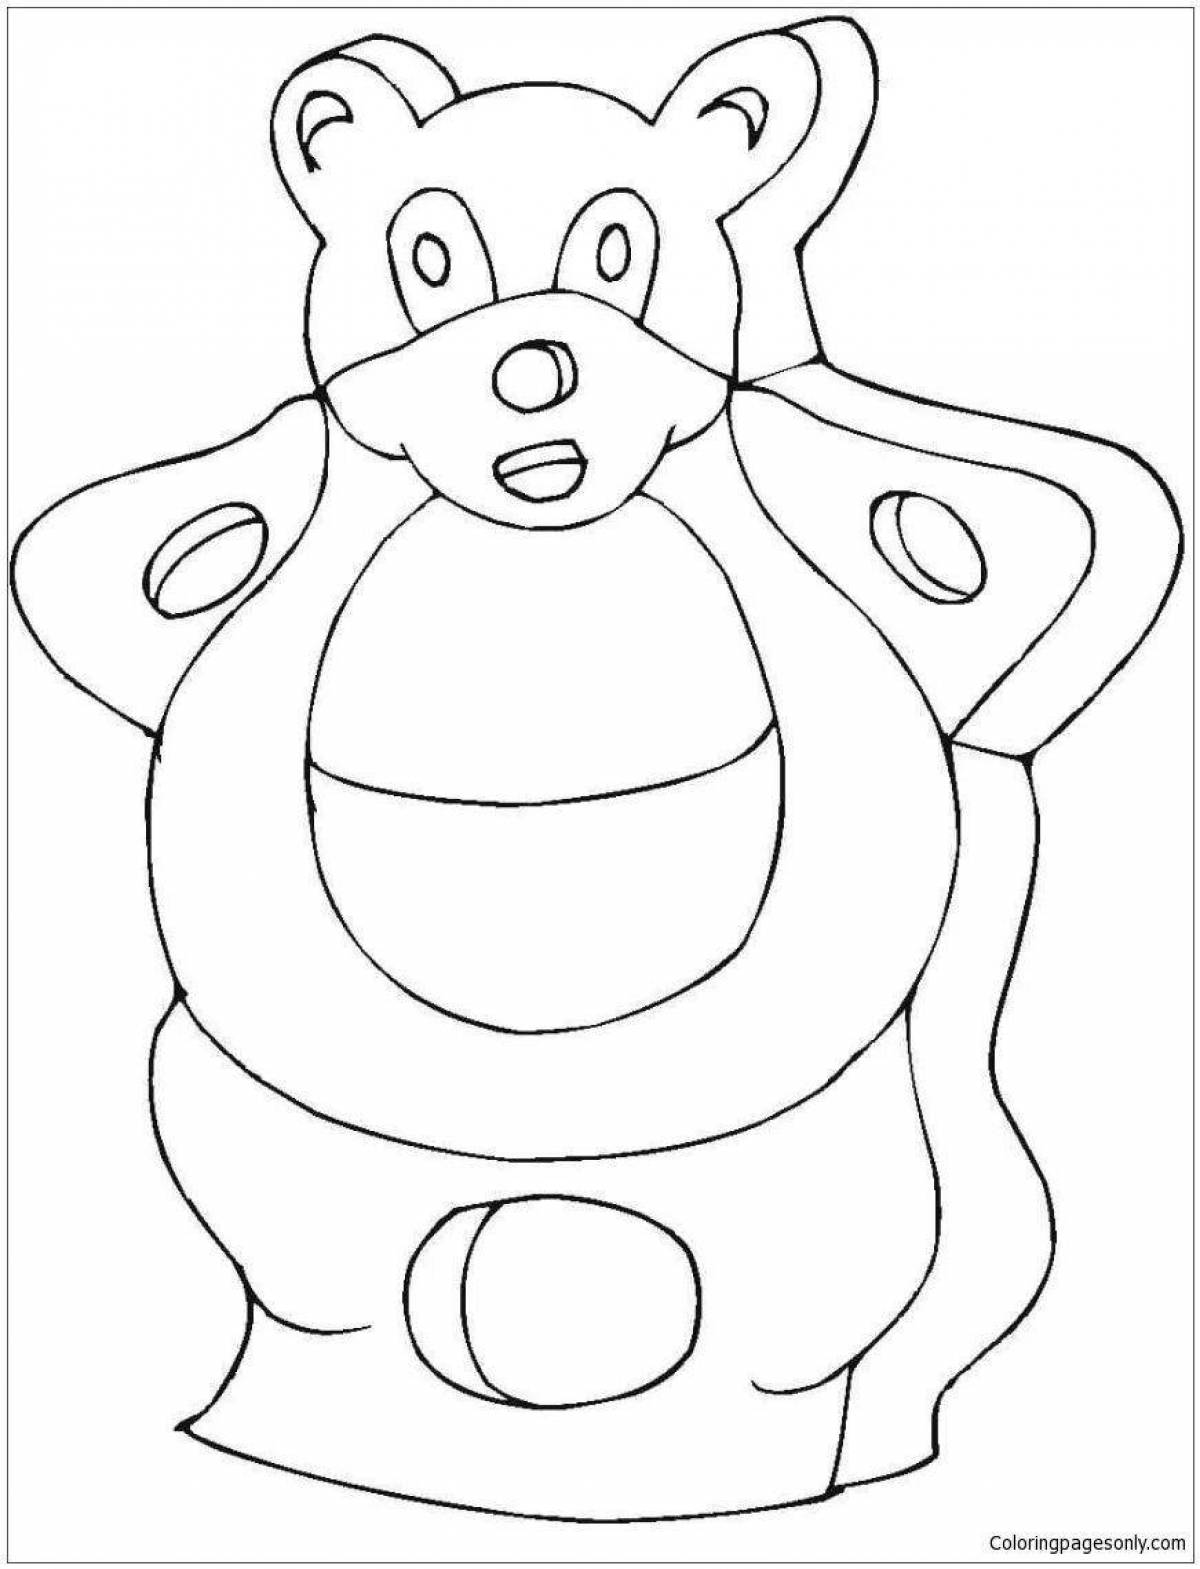 Sparkling gummy bear coloring page